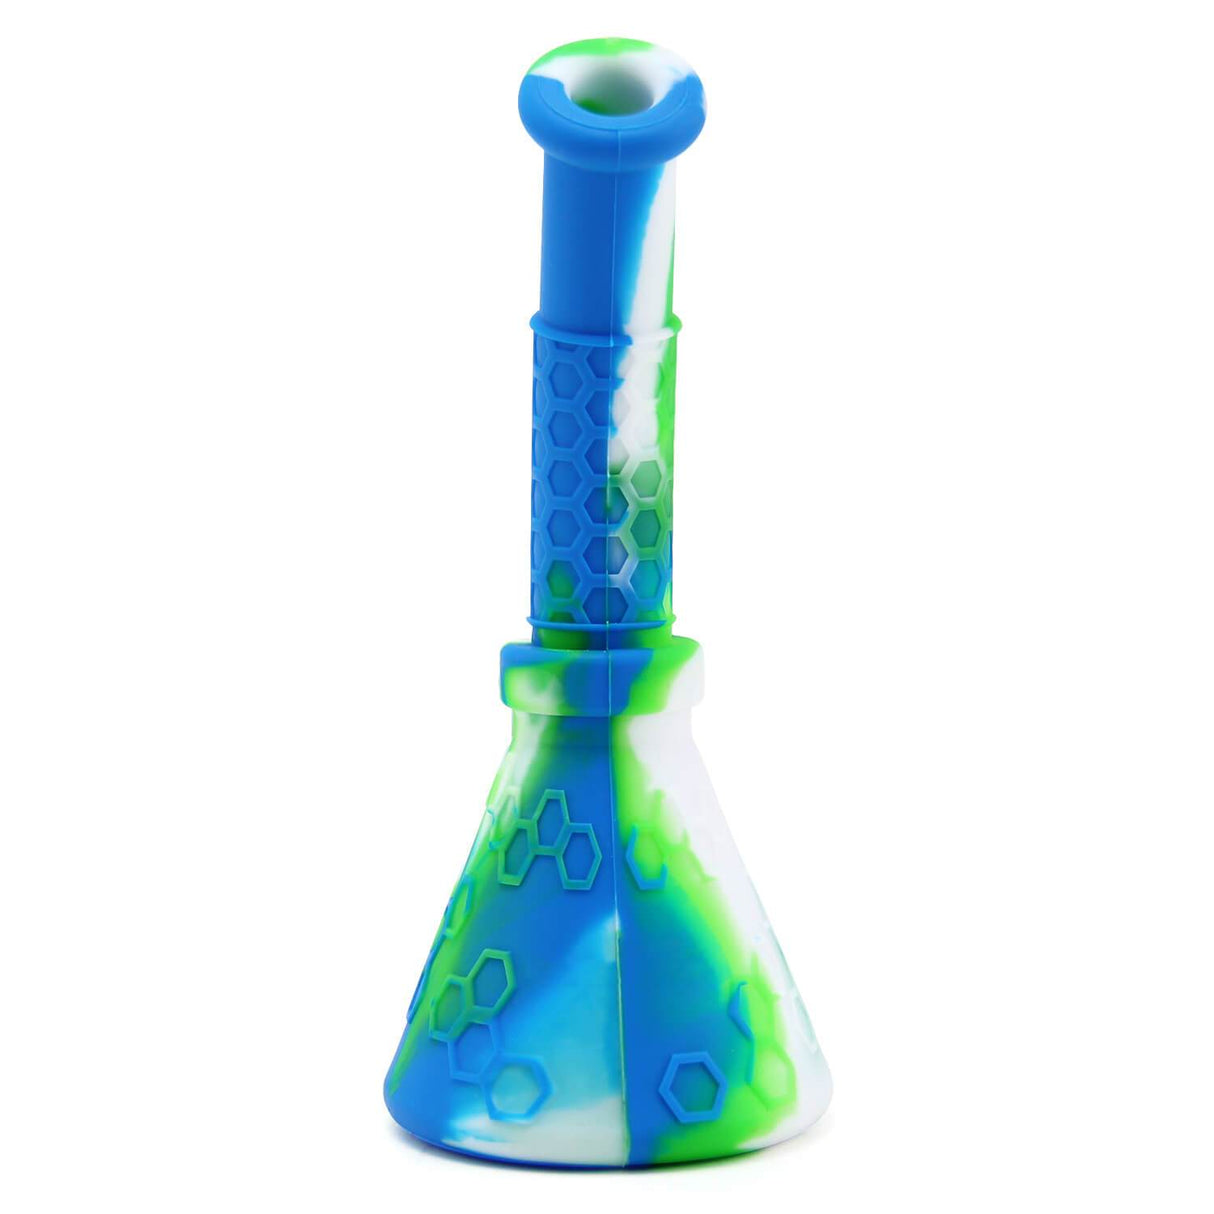 PILOT DIARY Silicone Beaker Bong in Blue and Green - Durable, Easy to Clean - Front View